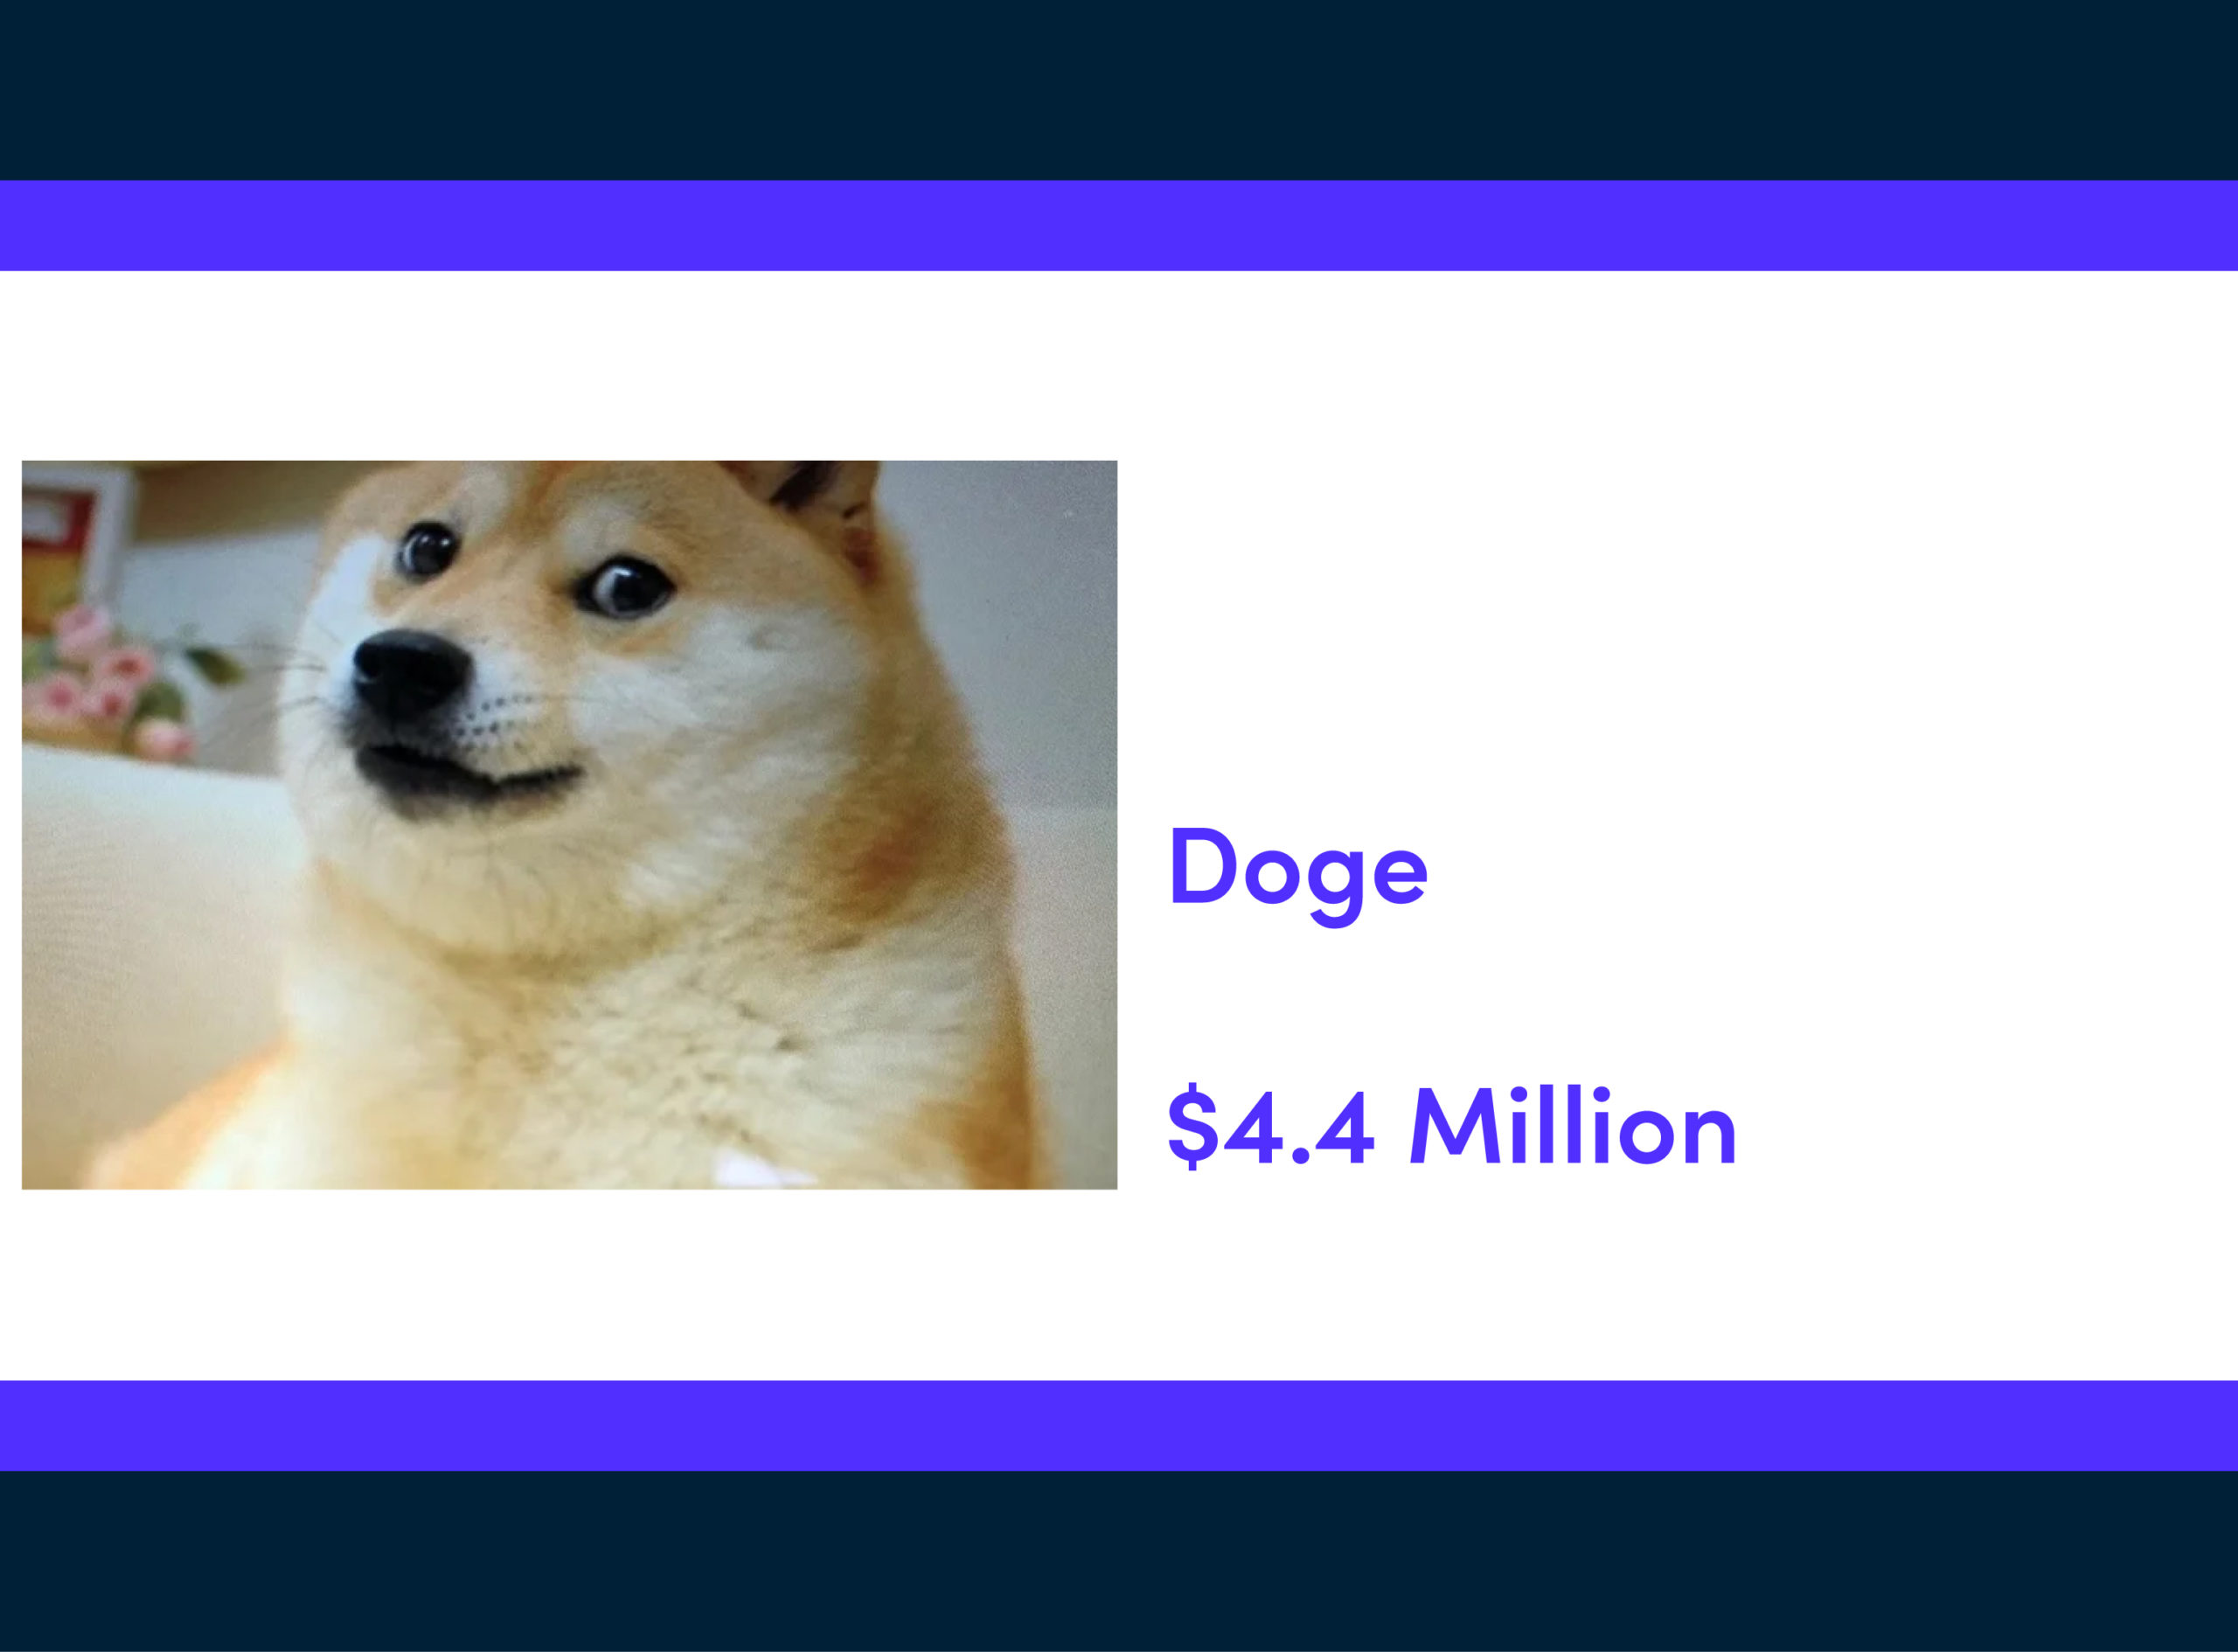 The Most Expensive NFTs: Doge